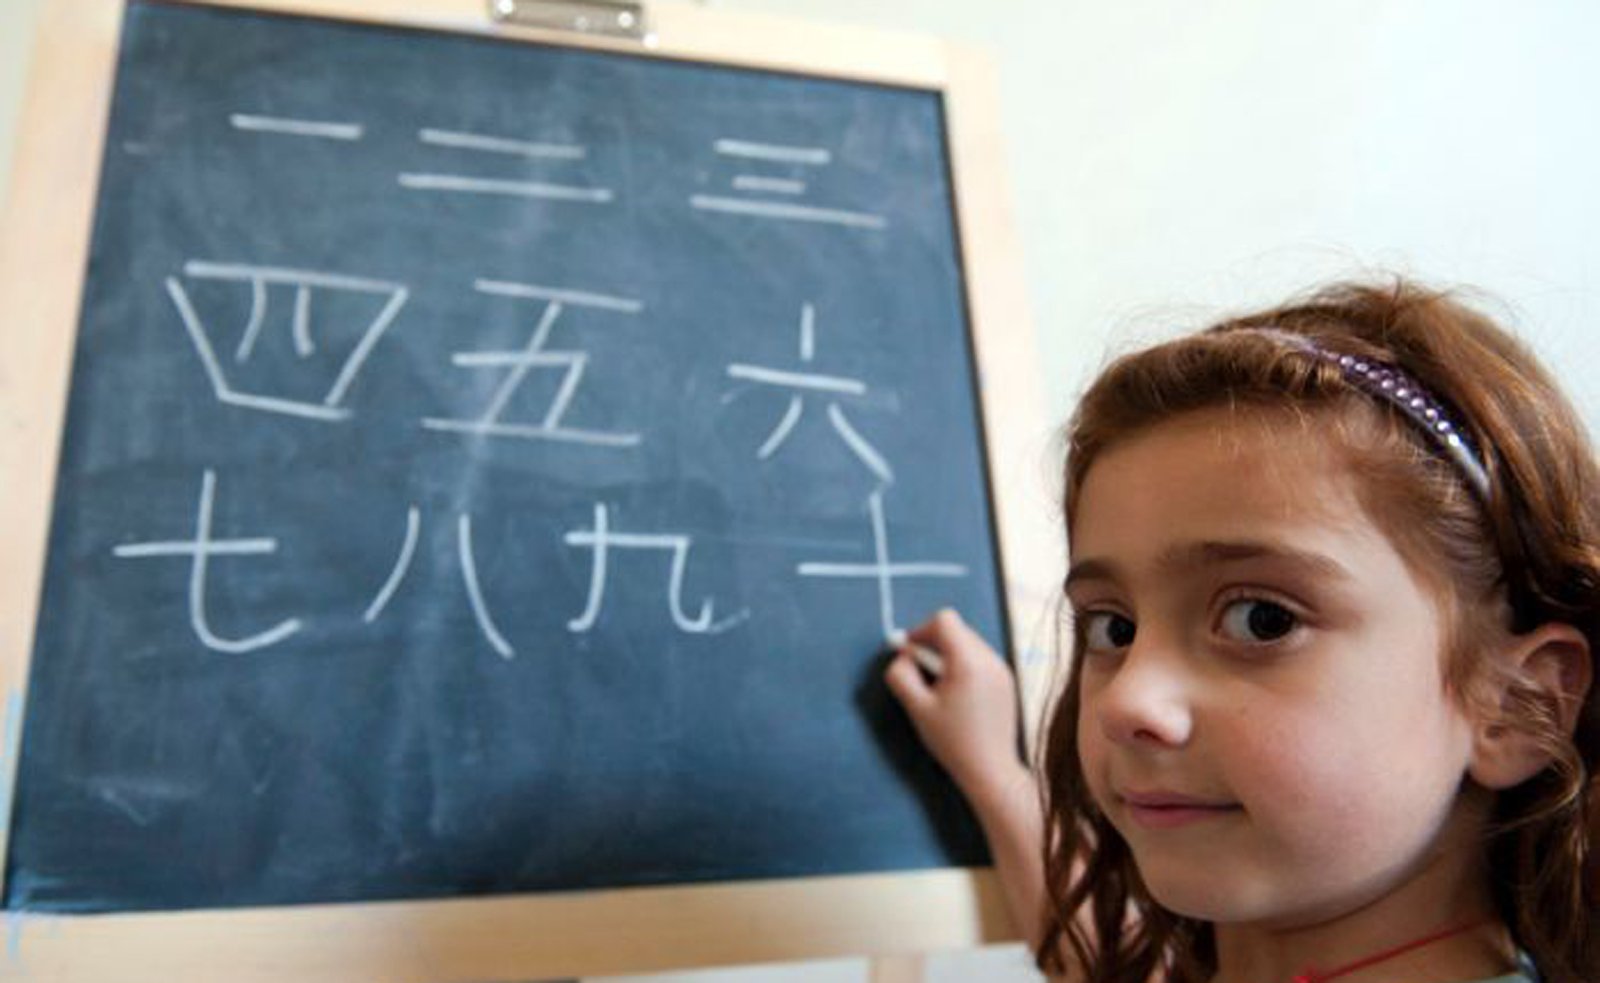 Most of the world’s people acquire second and third languages as easily as they achieve basic literacy and numeracy. (Iain Masterton/ Photographer's Choice)